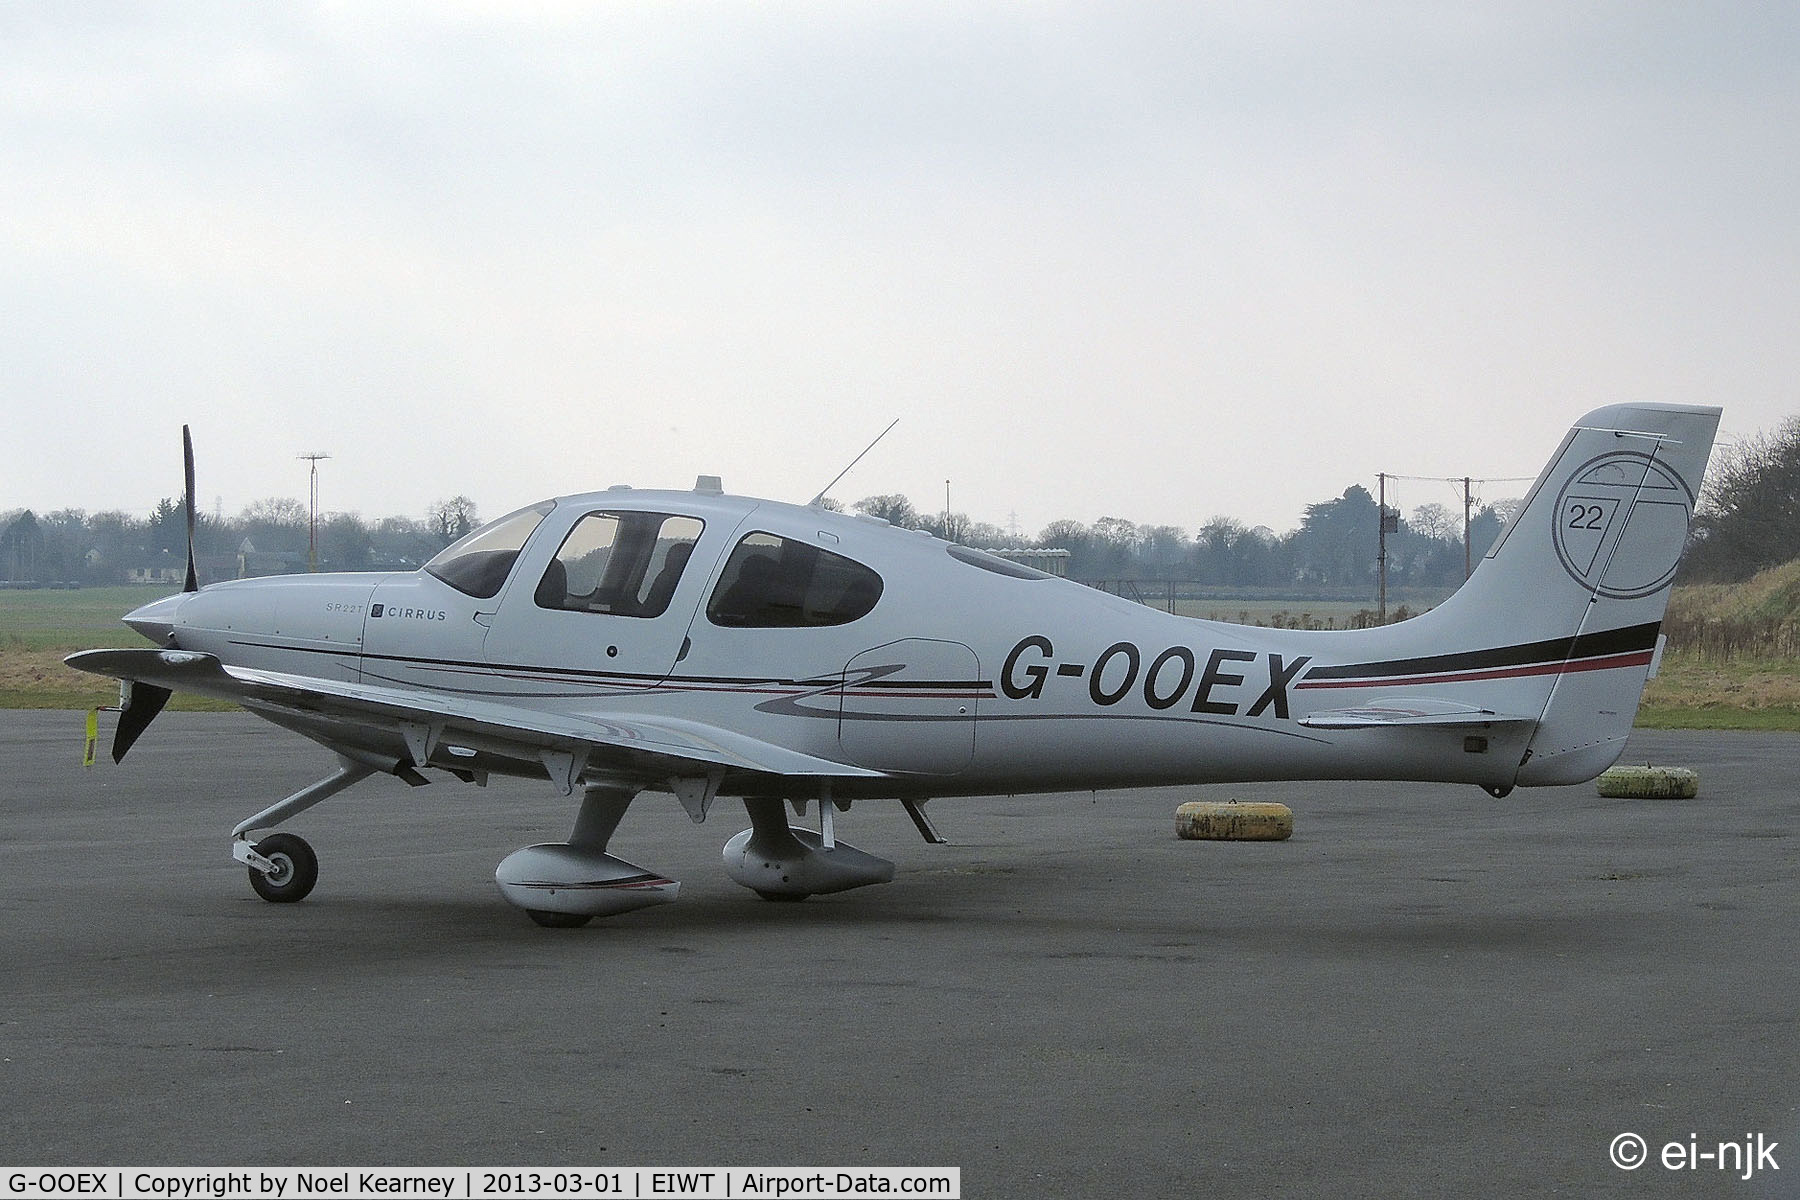 G-OOEX, 2010 Cirrus SR22T C/N 0010, Parked on the apron at Weston.